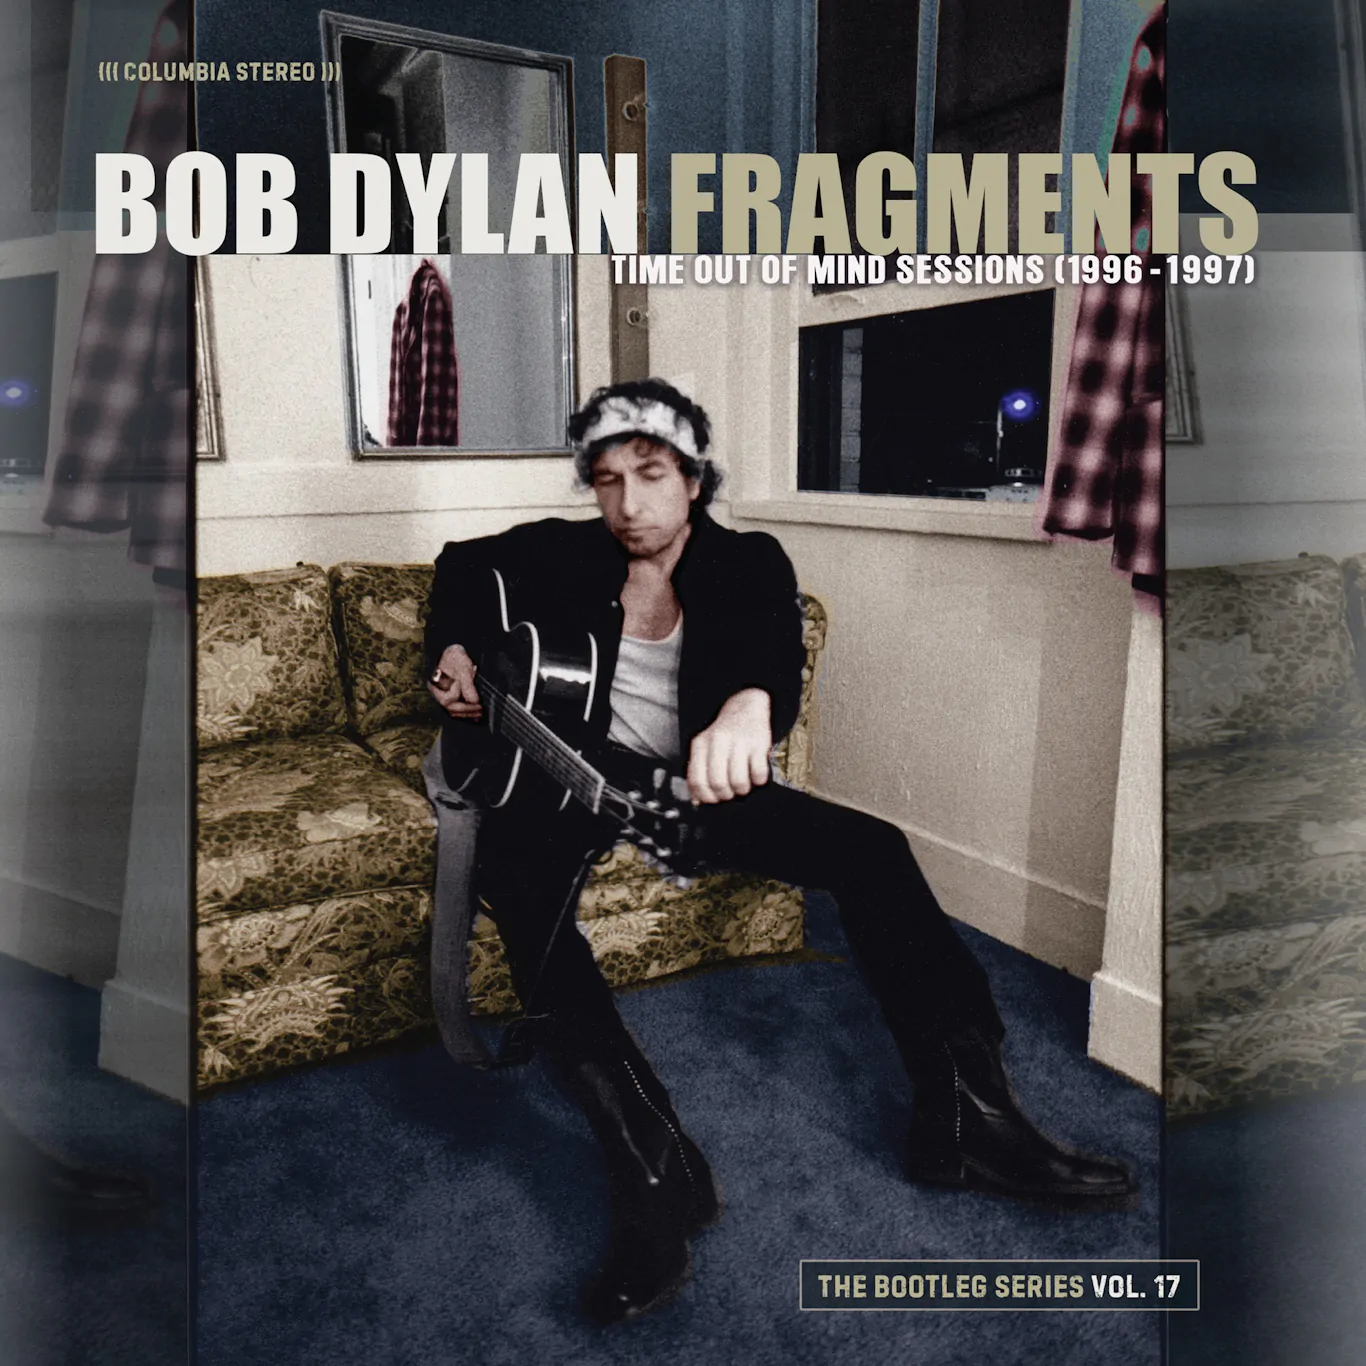 ALBUM REVIEW: Bob Dylan – Fragments – Time Out Of Mind Sessions (1996 – 1997) The Bootleg Series Vol. 17